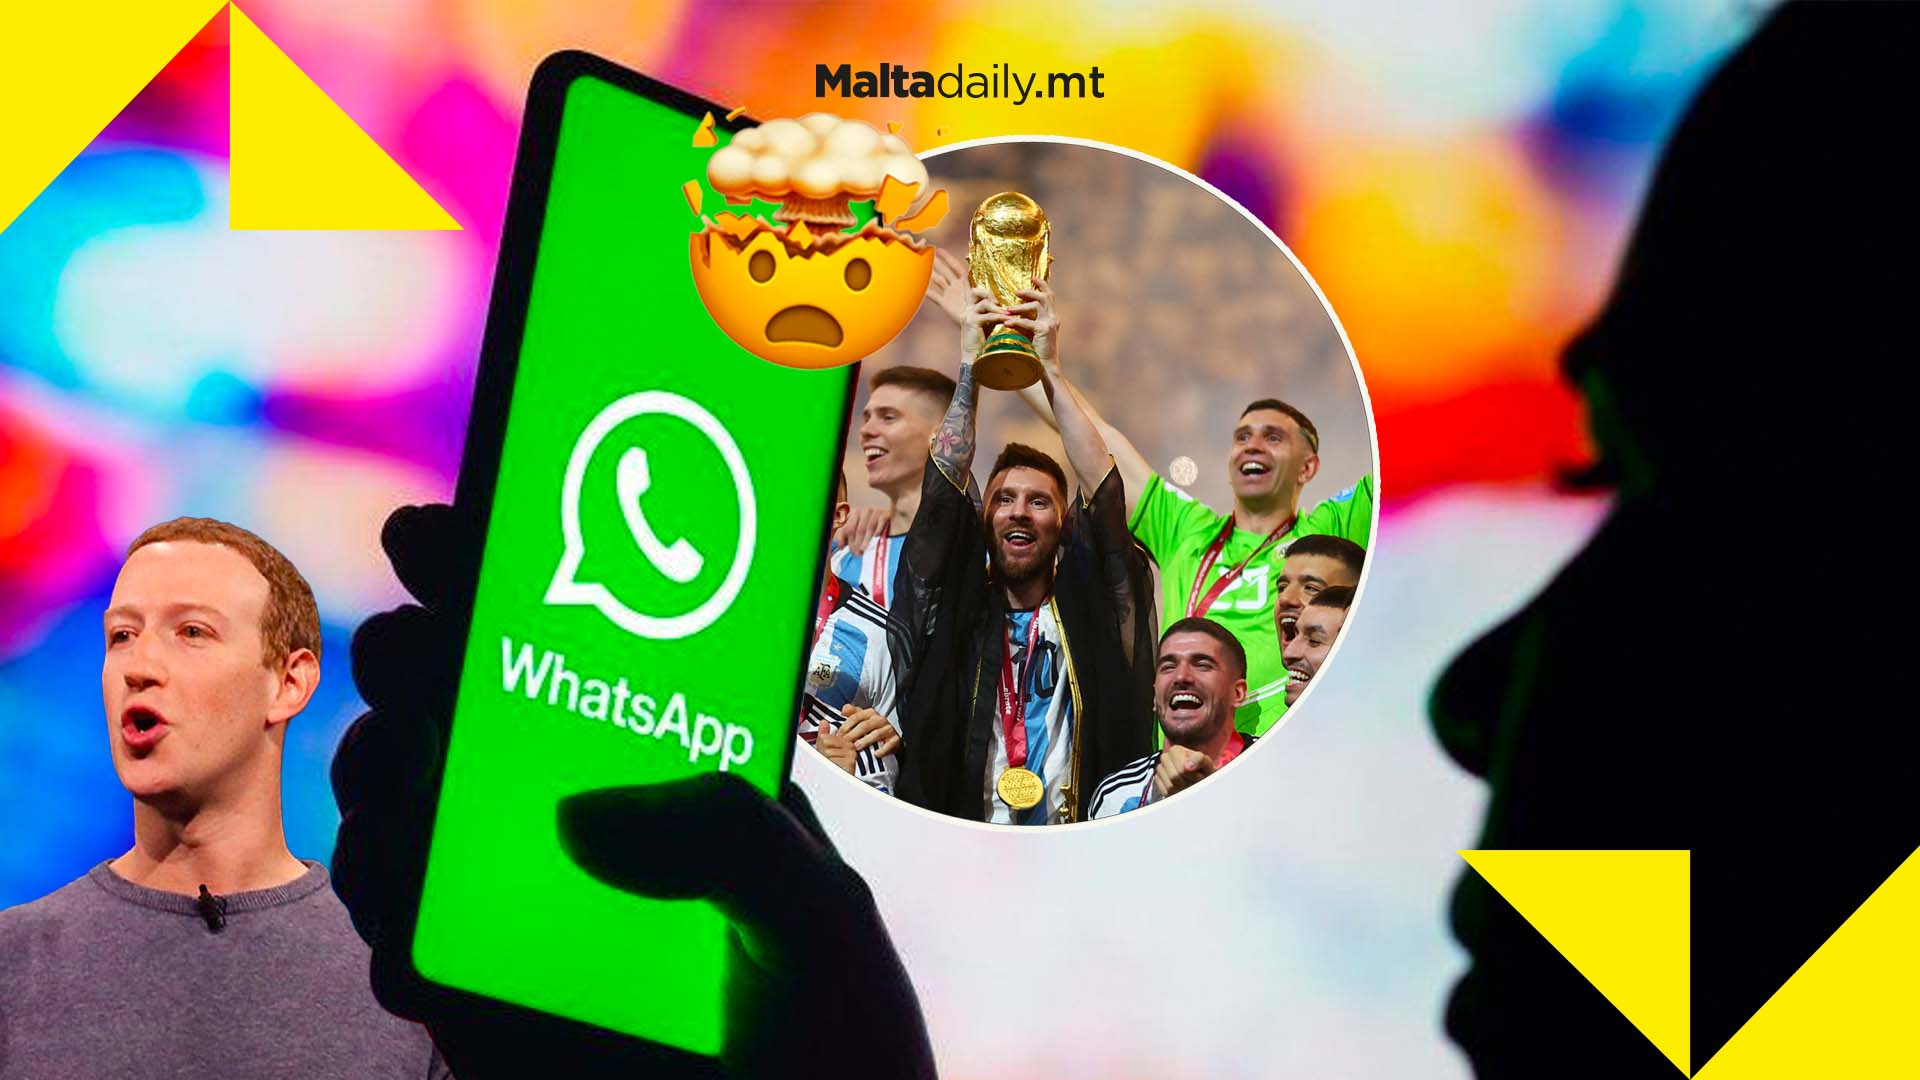 WhatsApp hit record 25 million messages per second during World Cup final